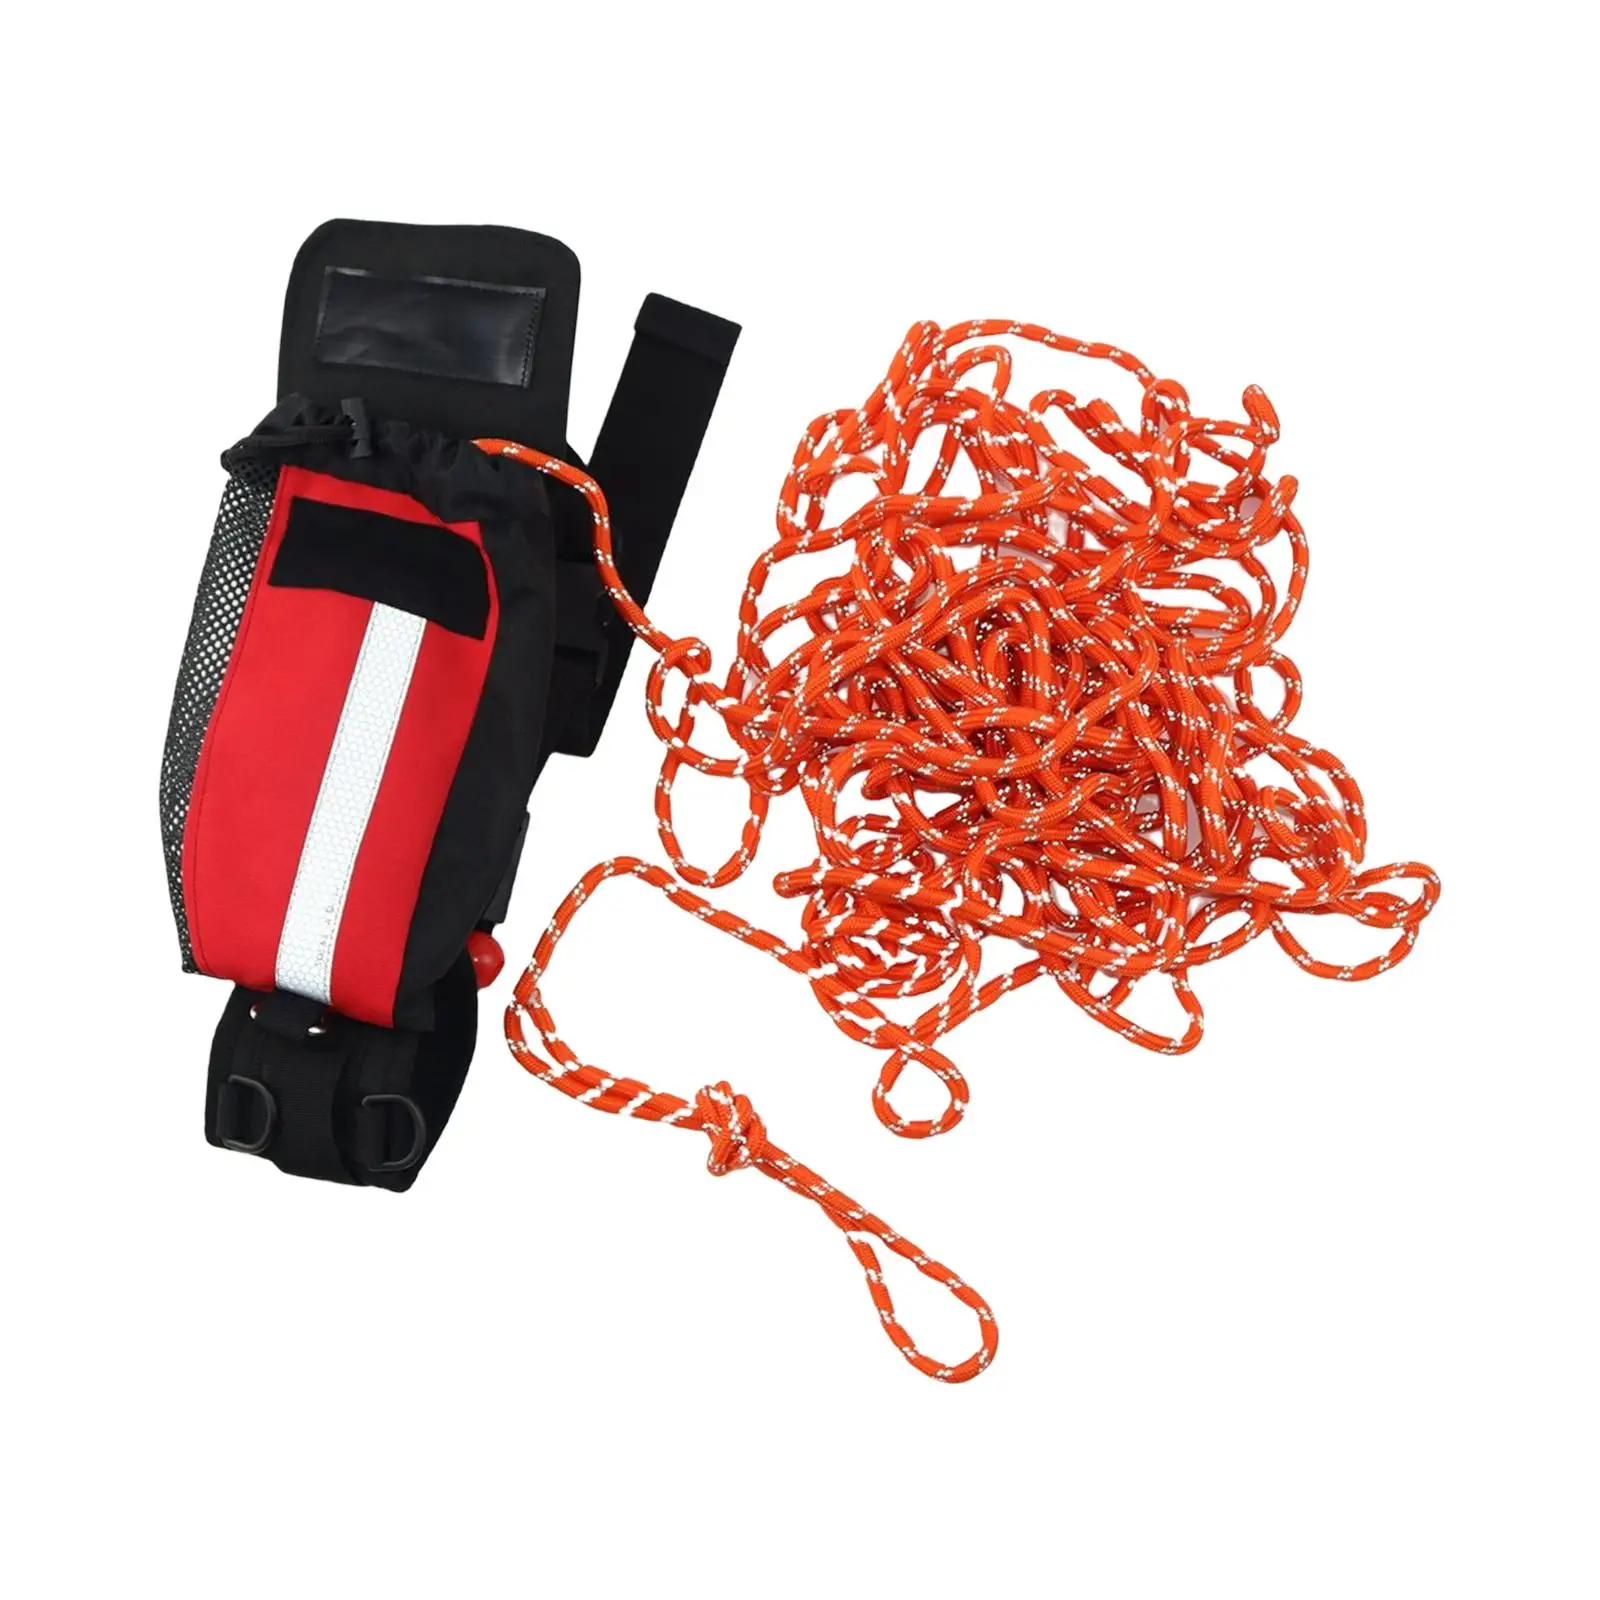 Reflective Rope Throw Bag High Visibility Accessories Device for Rafting Buoyant Dinghy Swimming Kayaking Ice Fishing